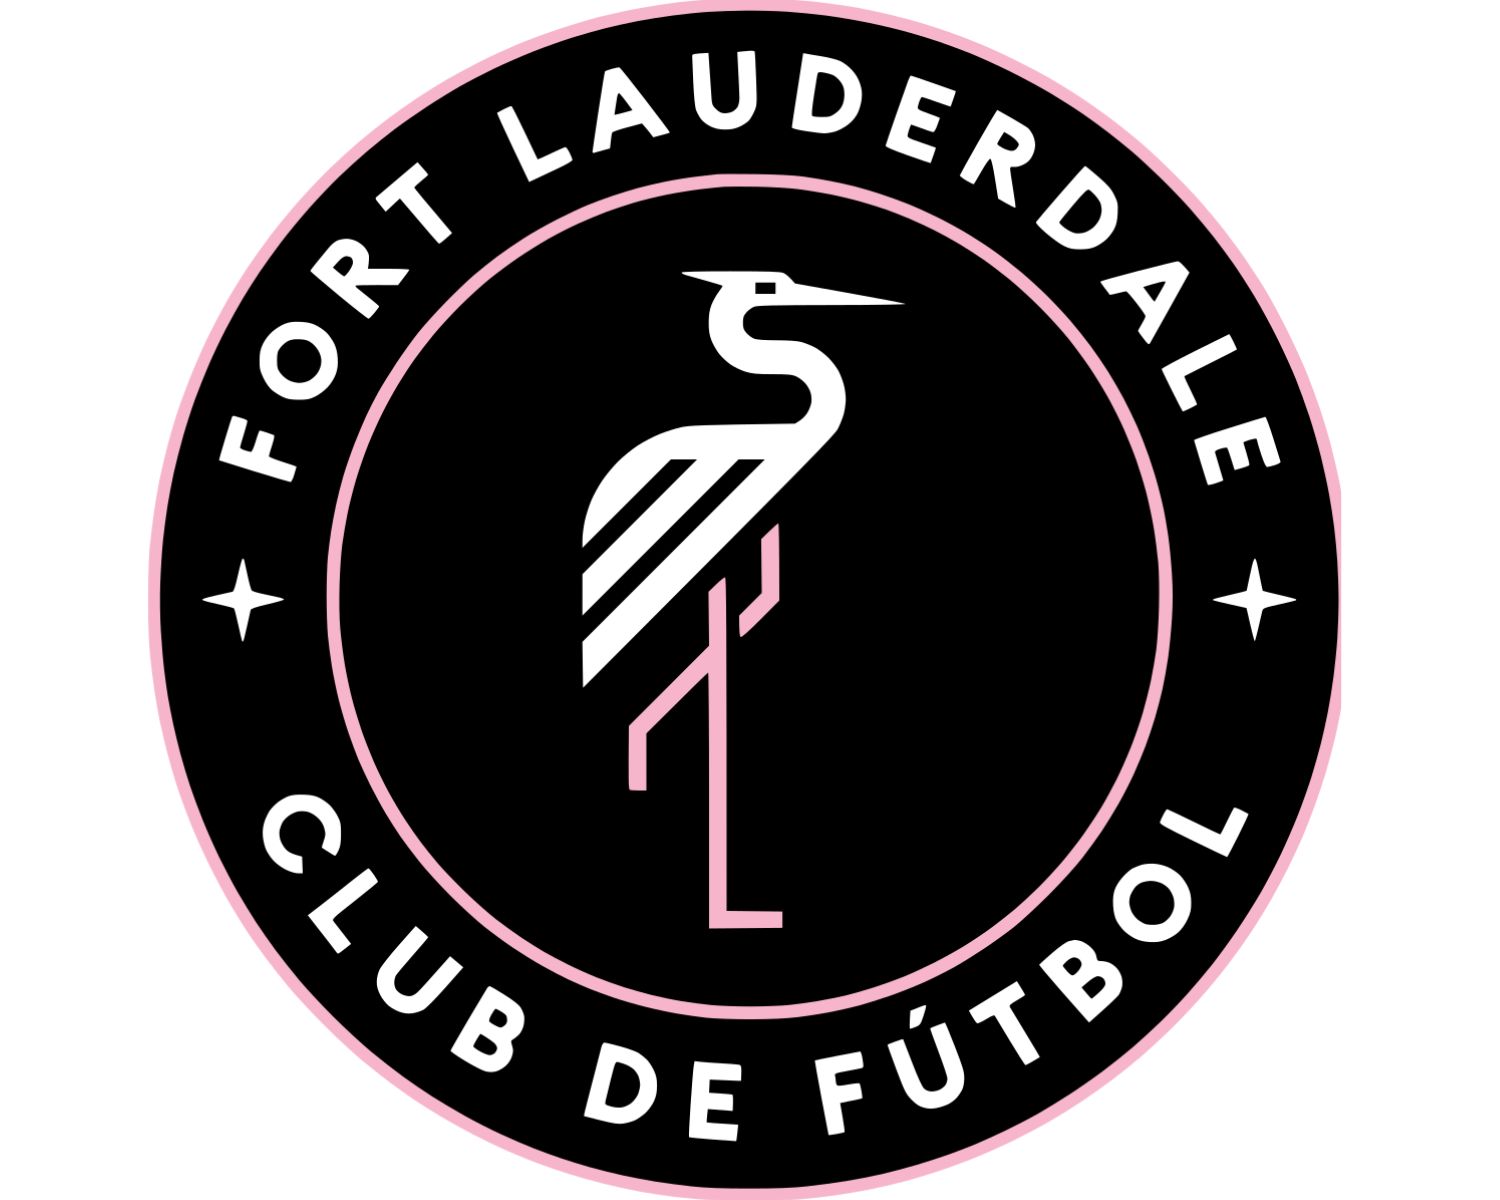 fort-lauderdale-cf-15-football-club-facts